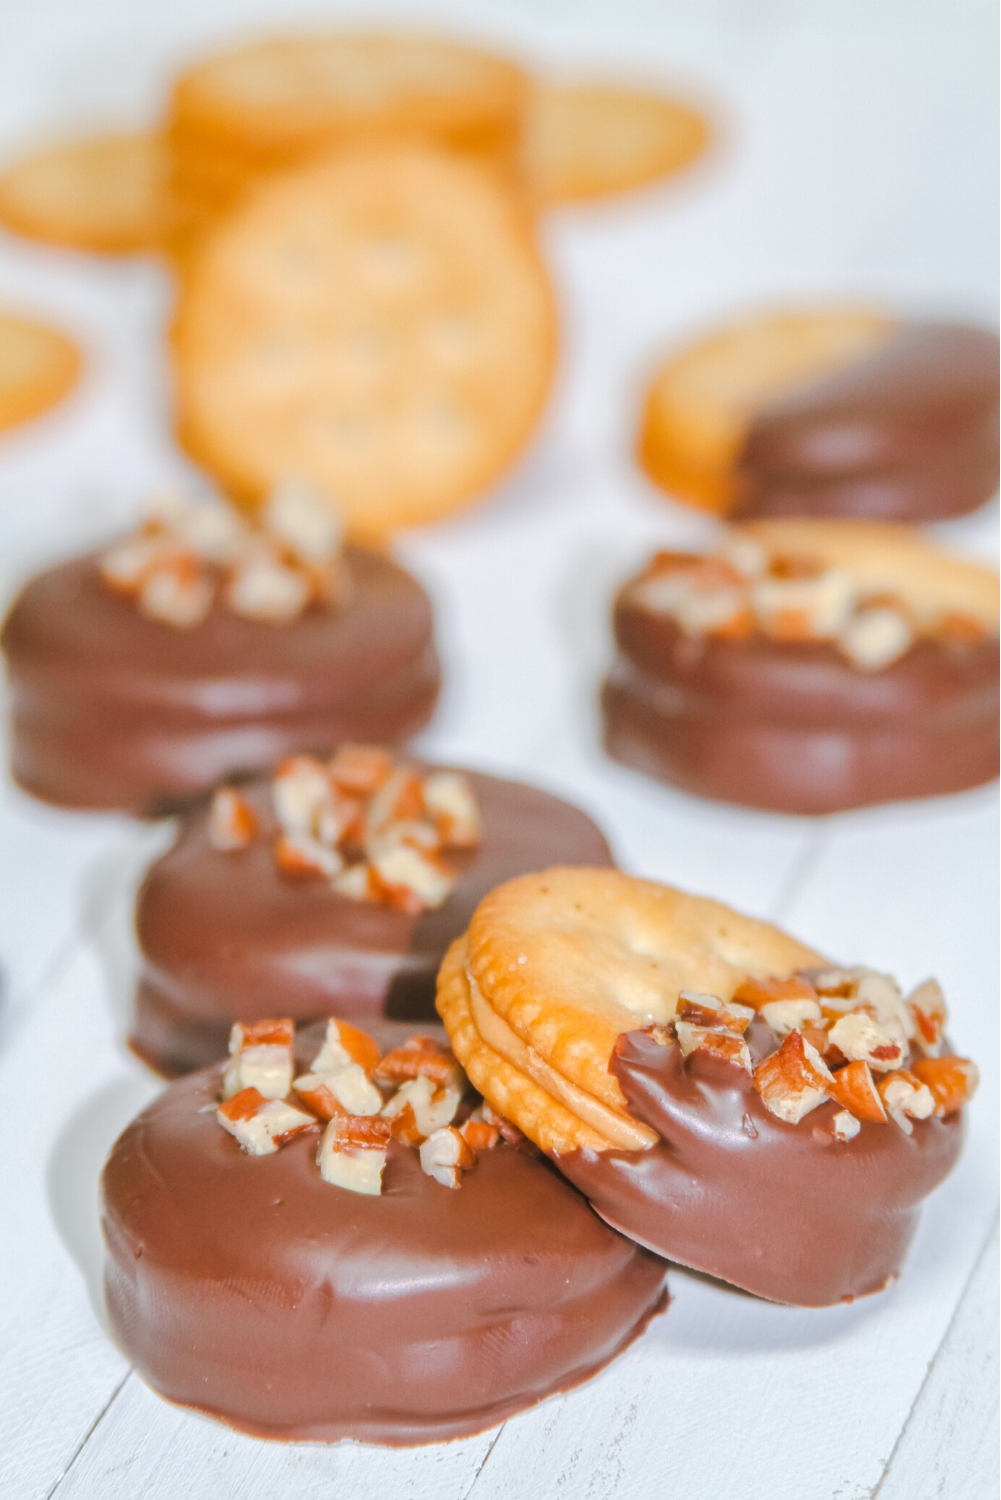 No-Bake Chocolate Peanut Butter Ritz Cookies - Makes and Munchies